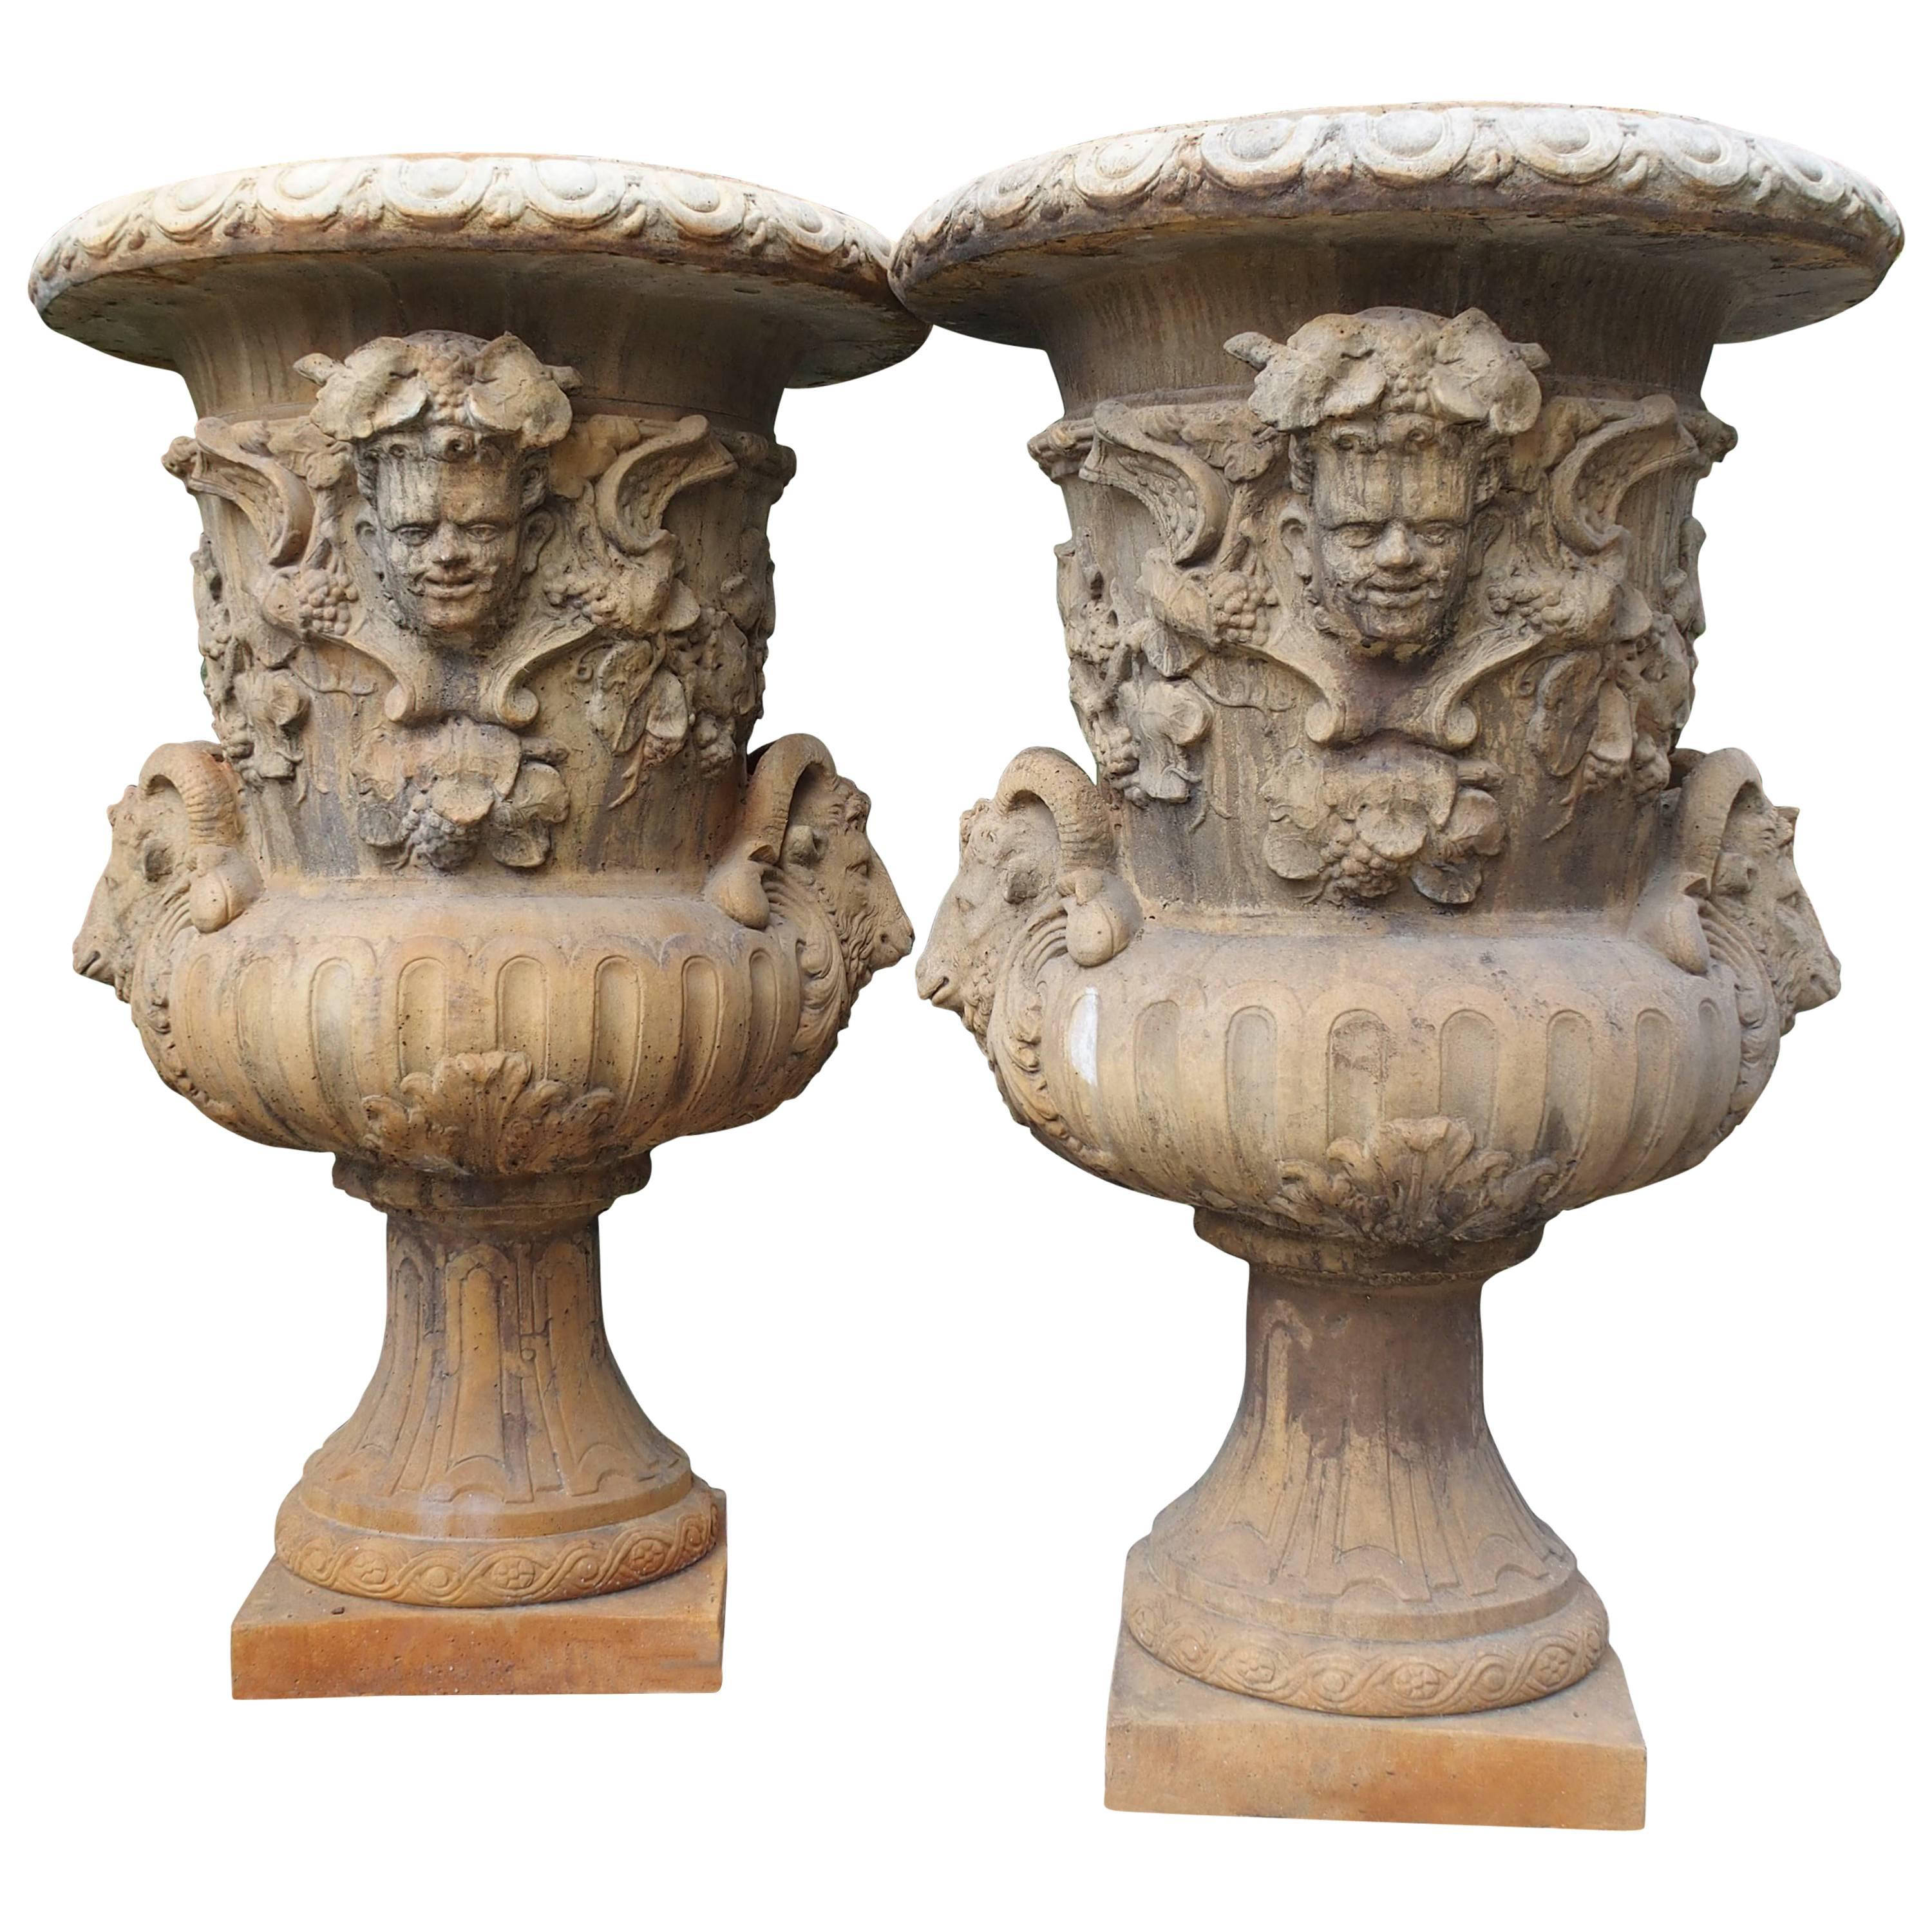 Pair of Large European Cast Garden Urns with Mascarons, Rams Heads, and Grape 